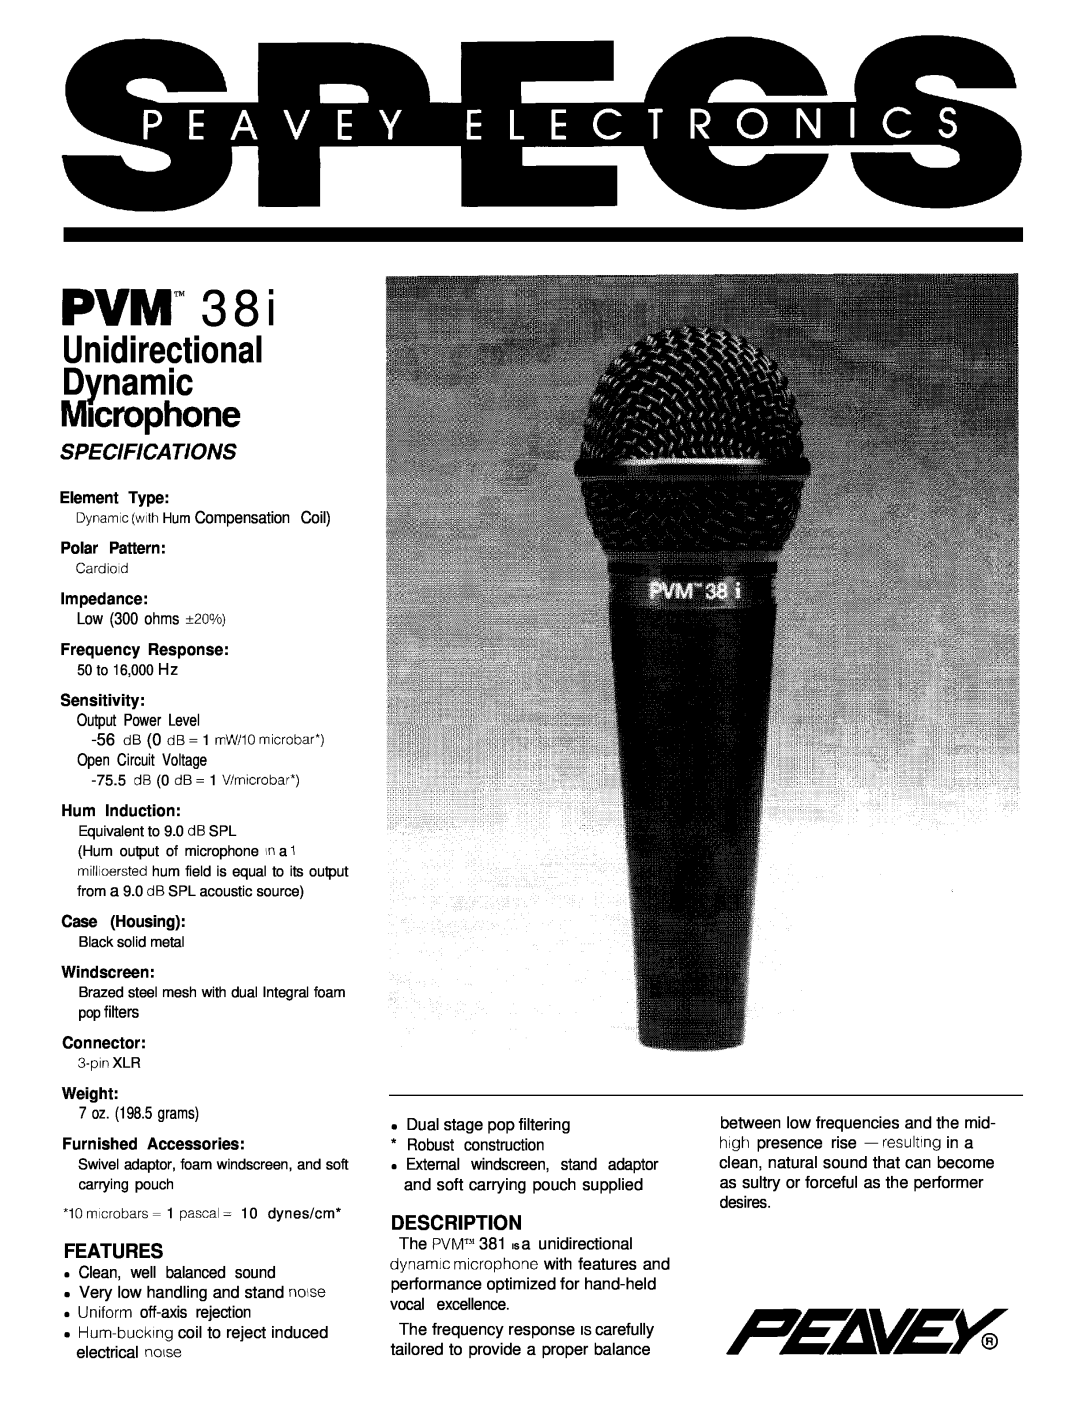 Peavey PVM 38i specifications Features, Description, Pvm’”, Unidirectional Dynamic MIcrophone, Specifications 